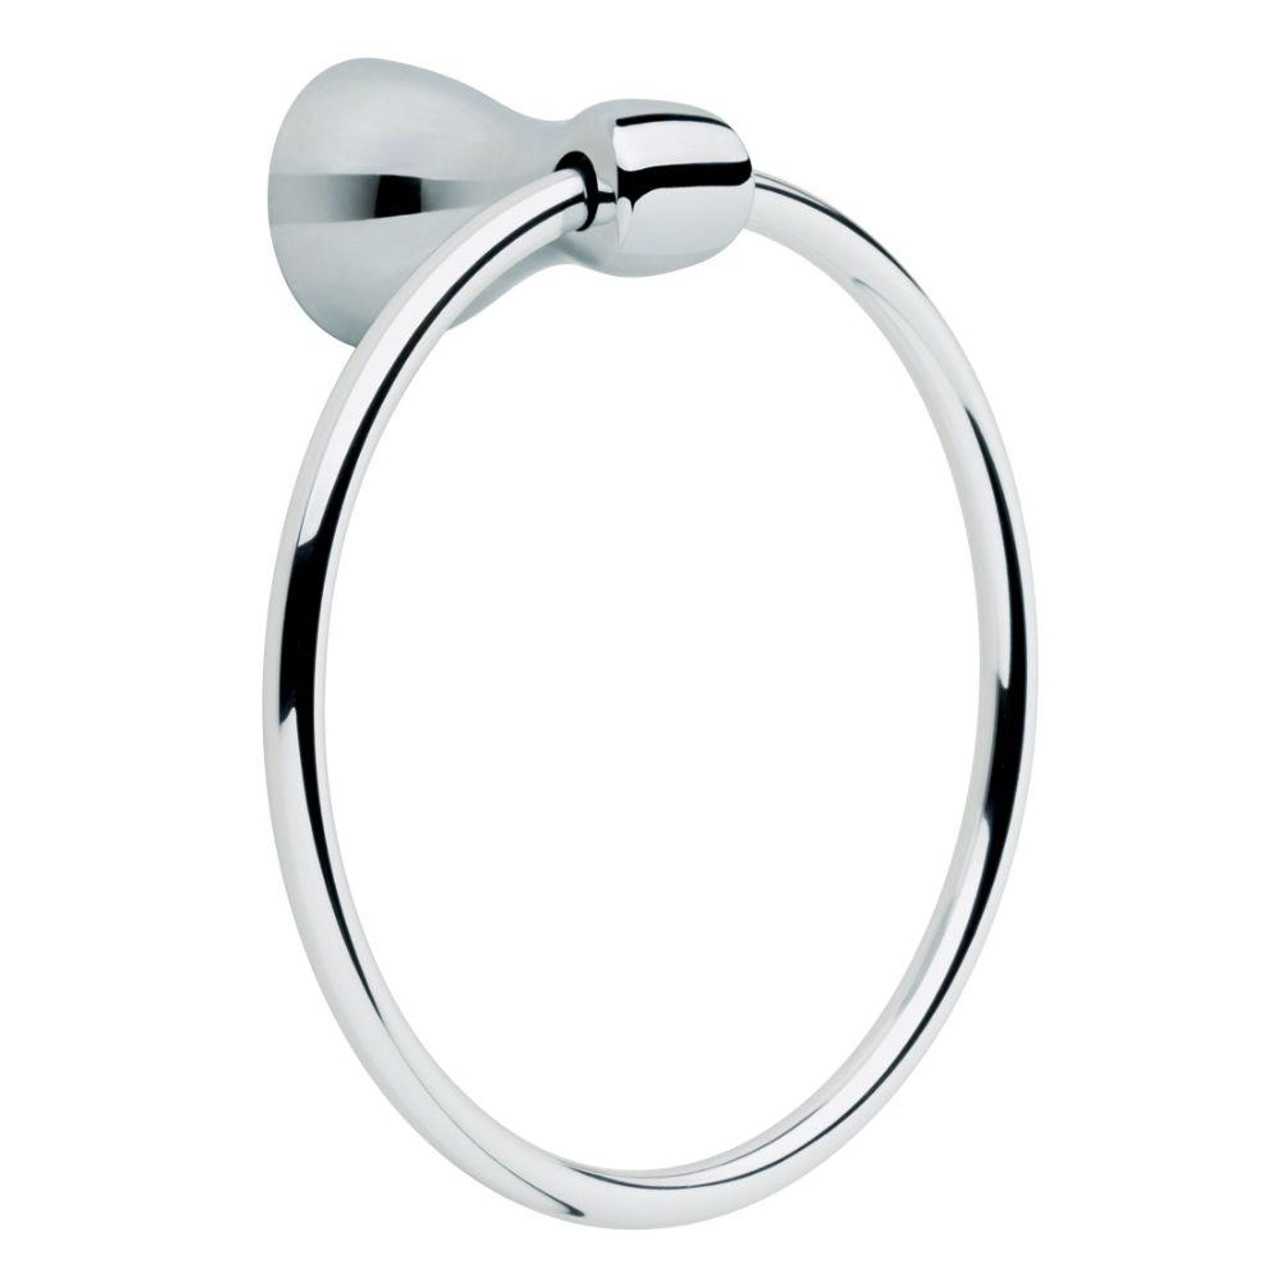 Delta Foundations FND46-PC Bath Accessories Towel Ring Polished Chrome Finish